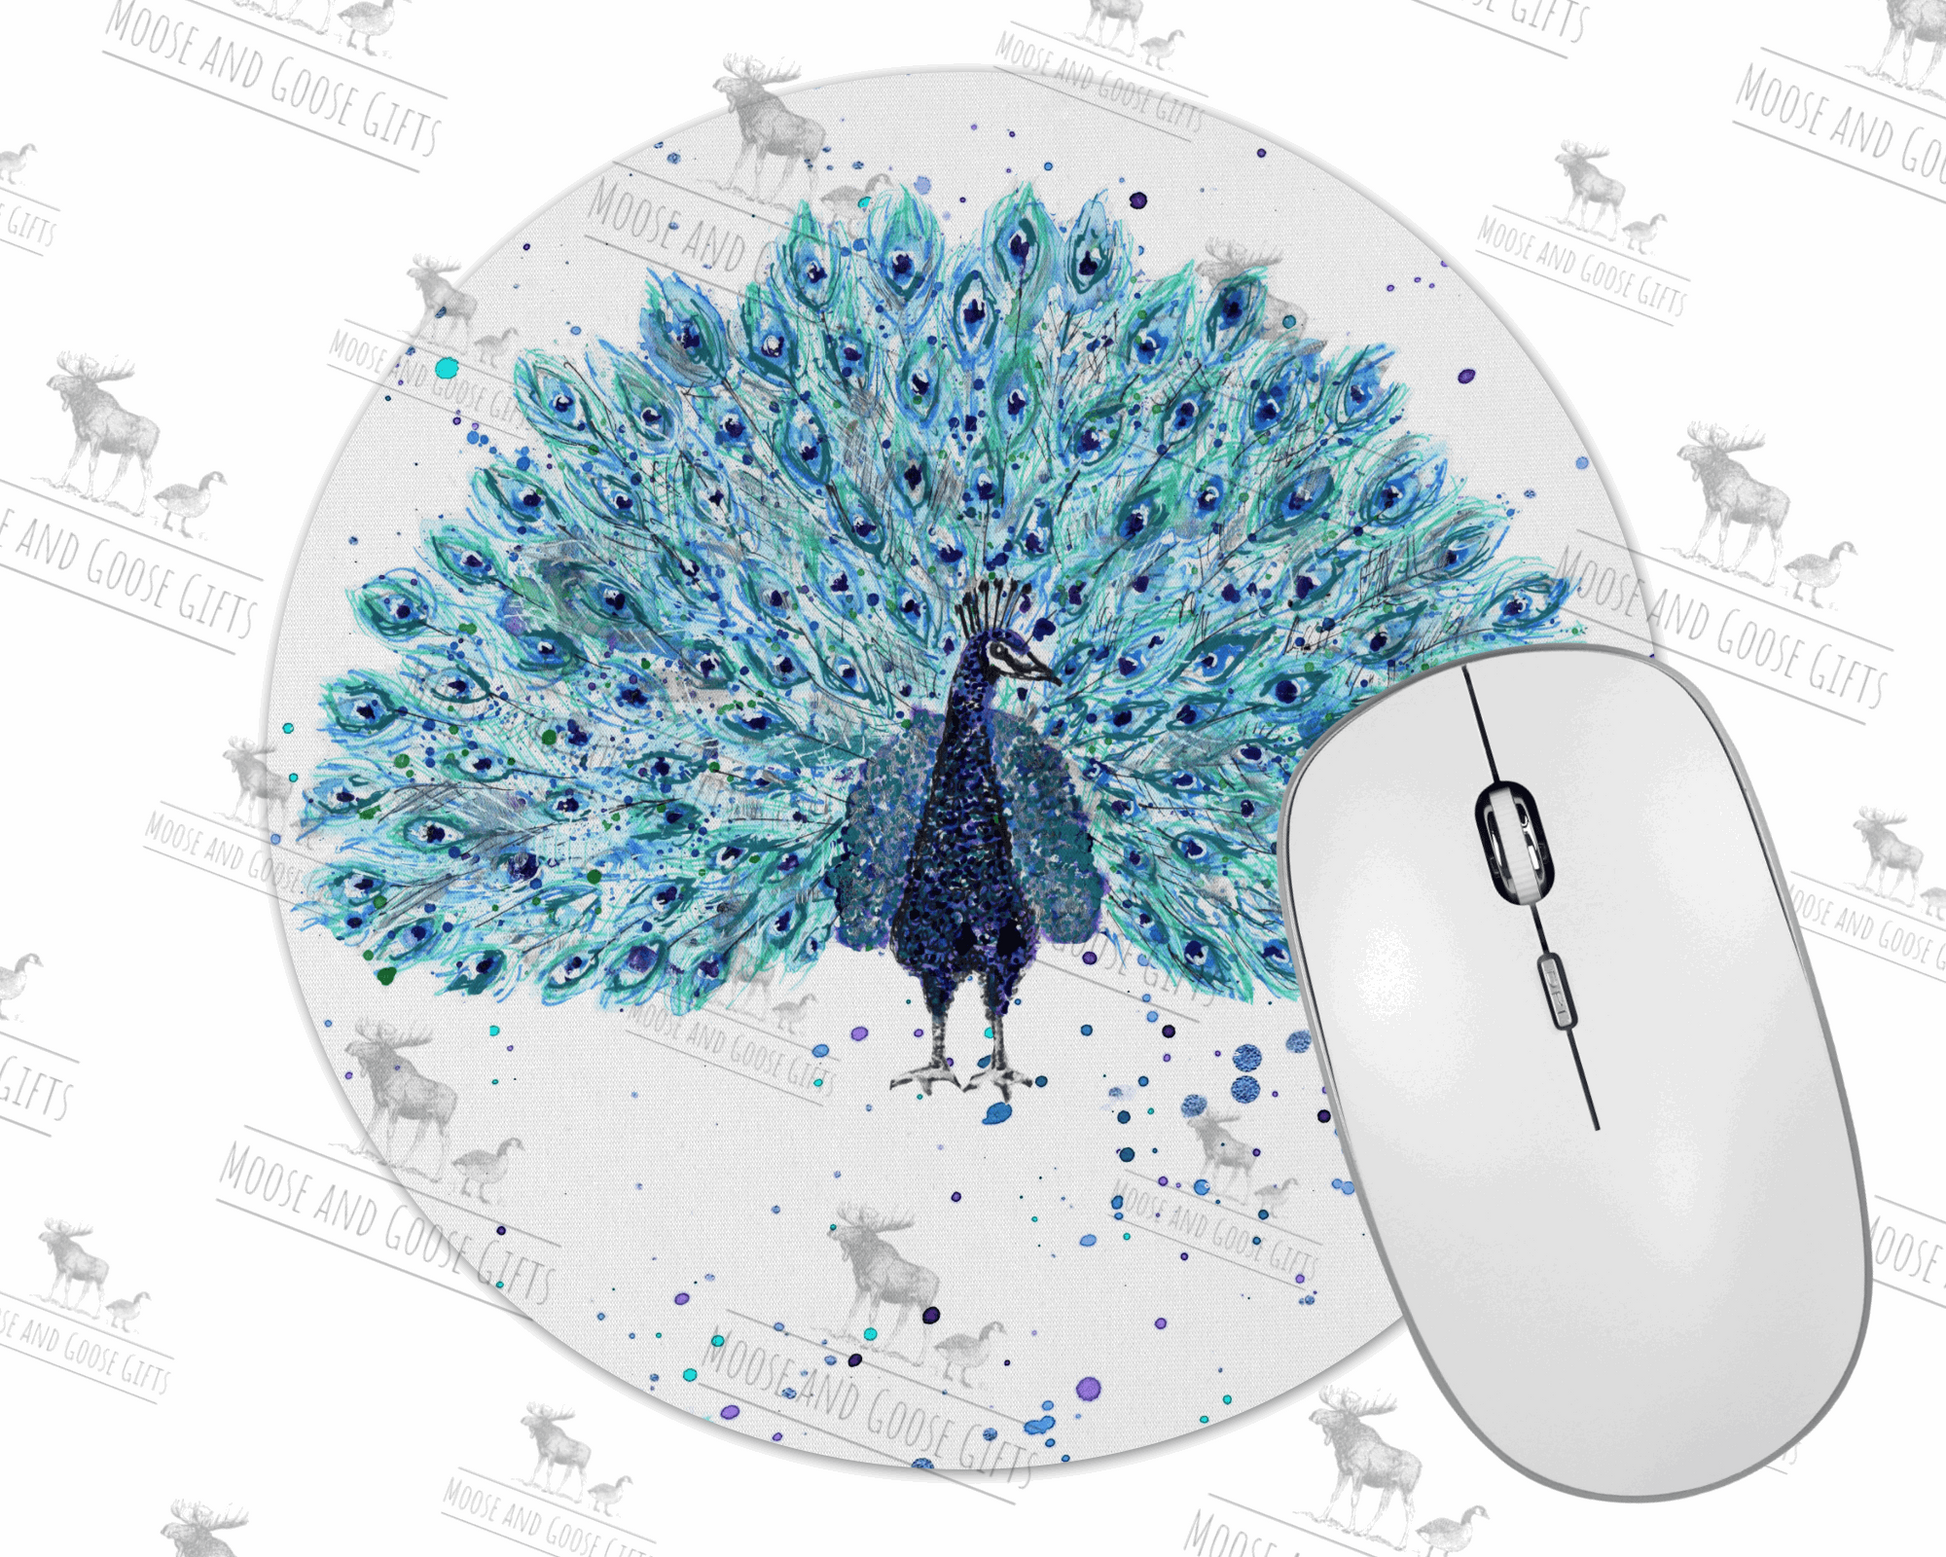 Peacock mouse mat - Moose and Goose Gifts